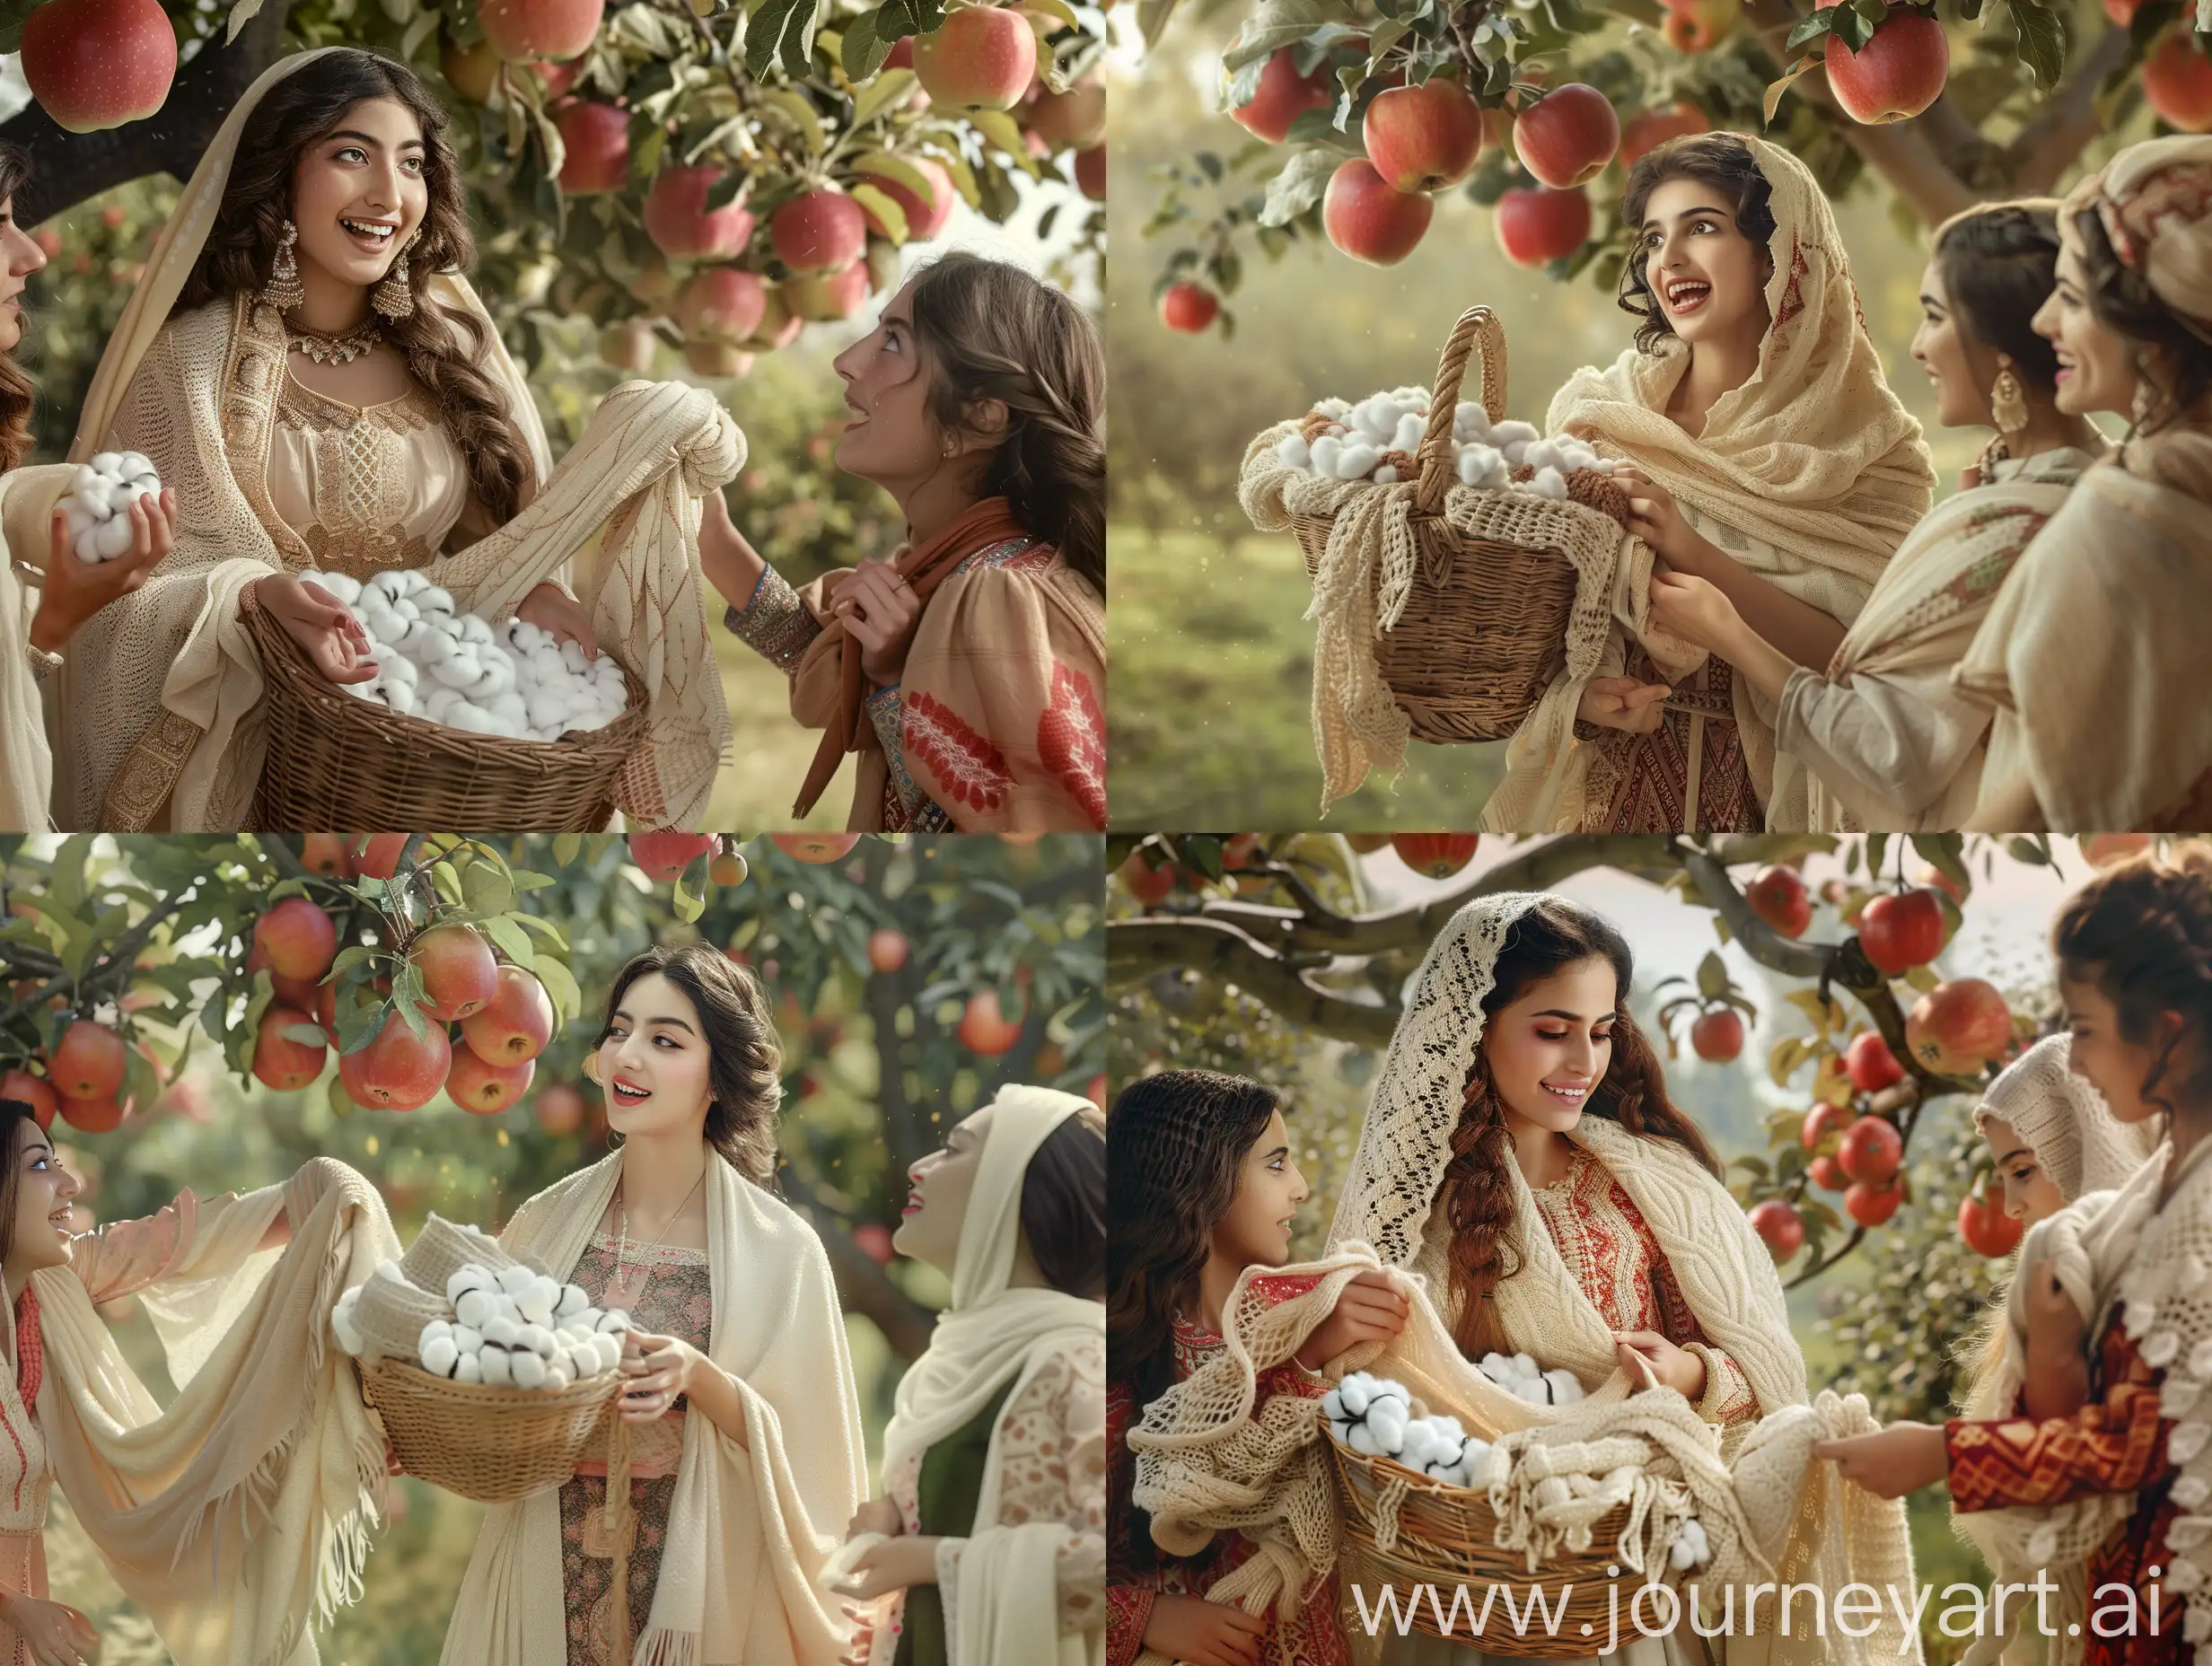 A beautiful young Persian woman in a traditional dress and a cream-colored shawl, while holding a basket full of shawls and cotton in her hand, shows her knitted shawls to her friends with a smile, and her friends are surprised.  They are under a big apple tree with apples the size of watermelons. Make a realistic high resolution photo with details.